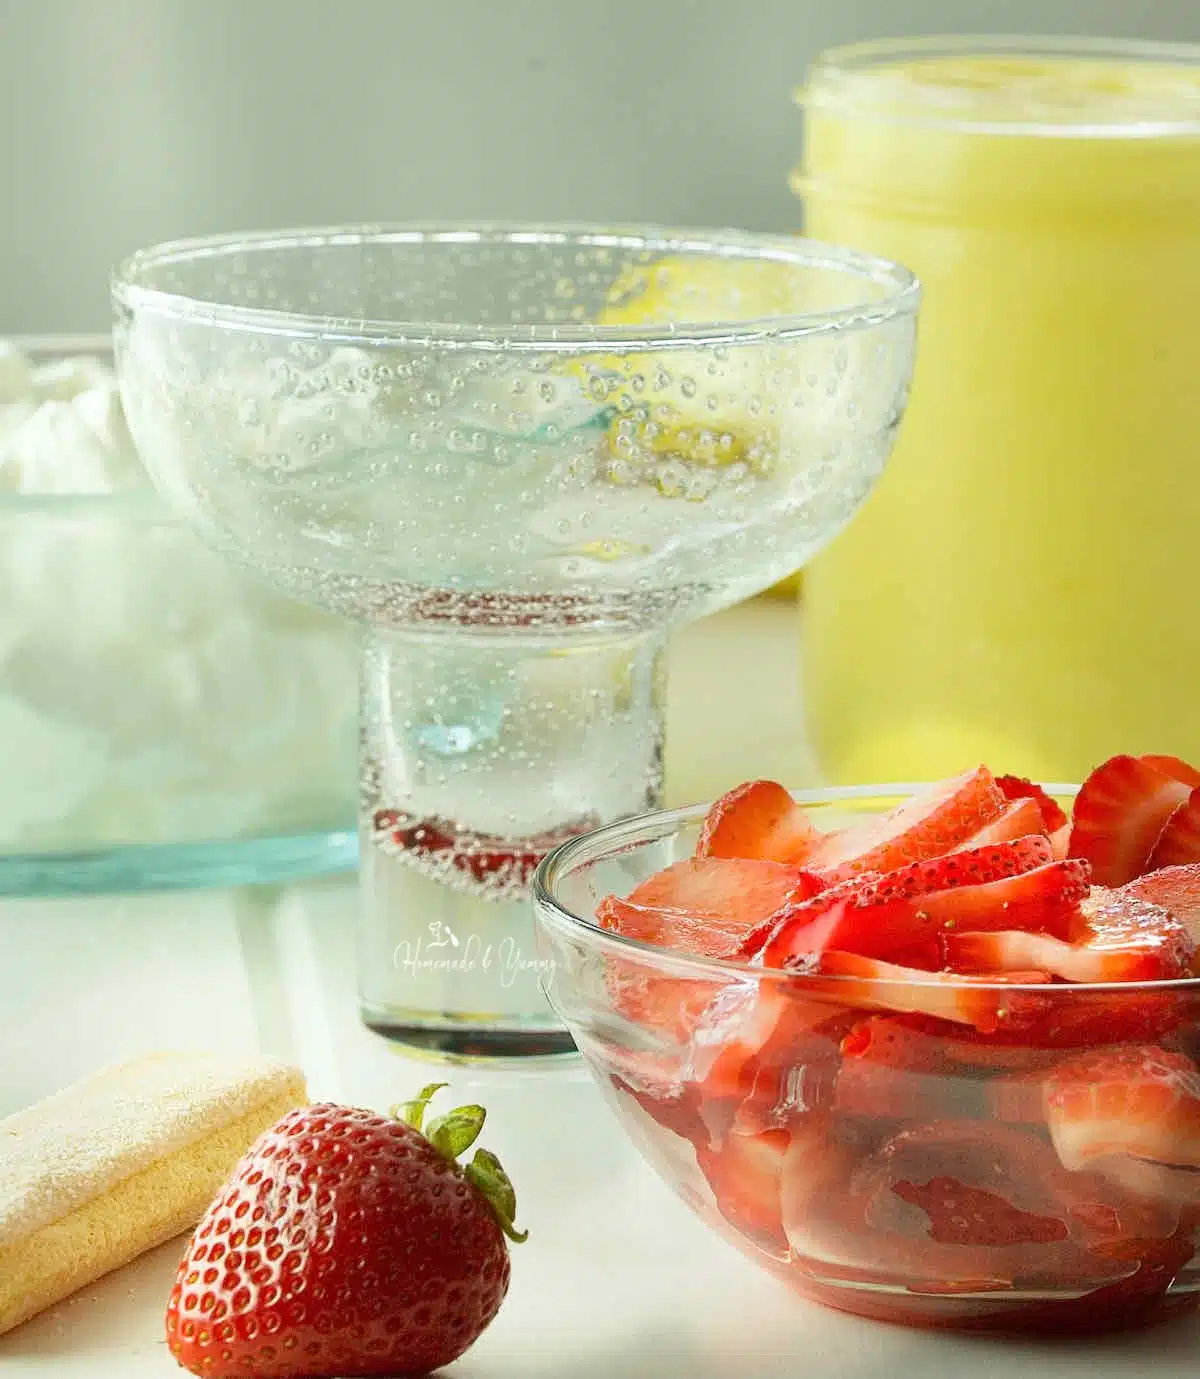 Ingredients needed to make a layered lemon curd dessert.